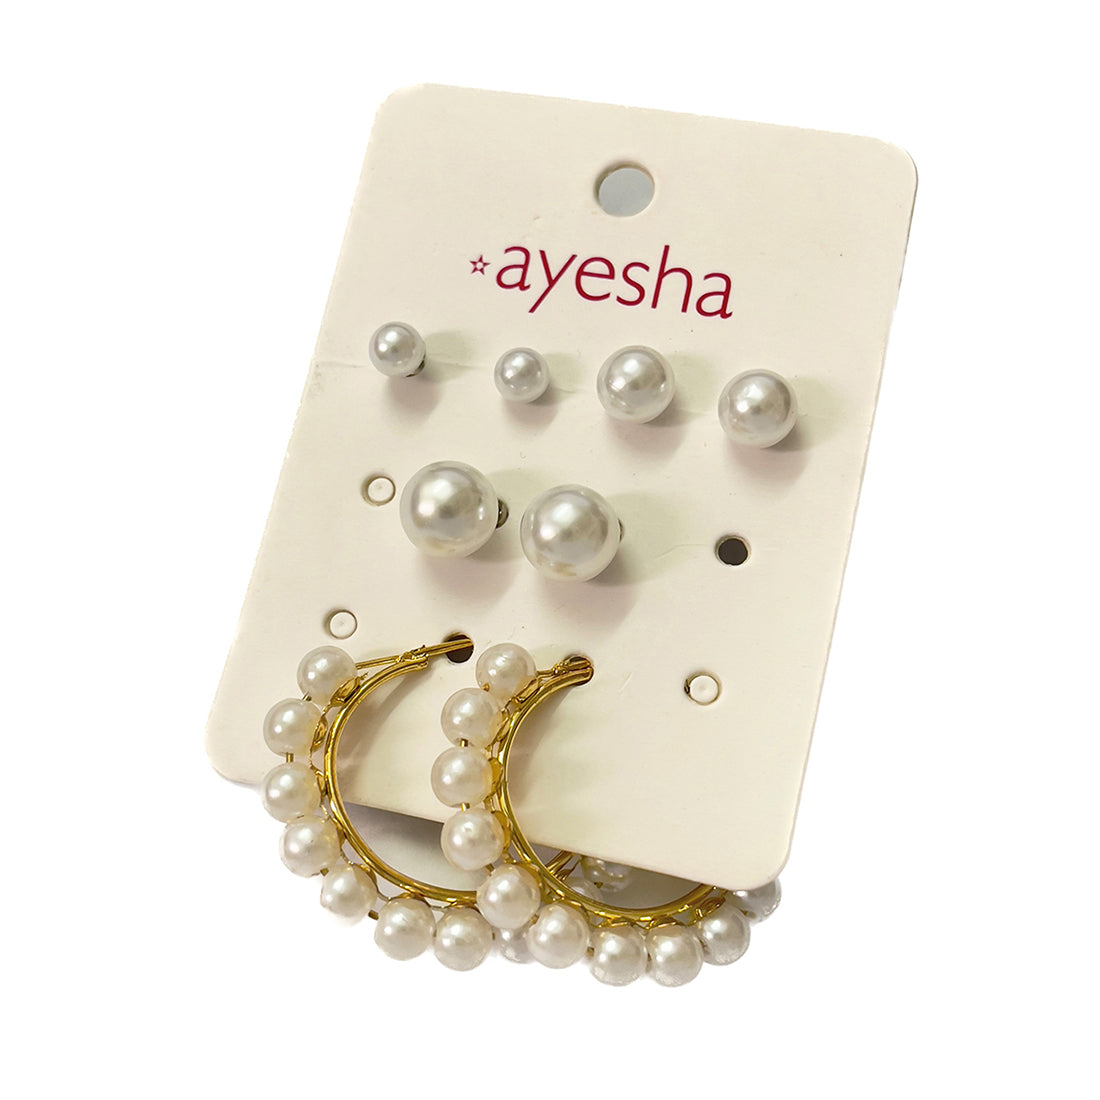 Set Of 4 Pearl Studs In Different Sizes & Gold-Toned Pearl Studded Hoop Earrings